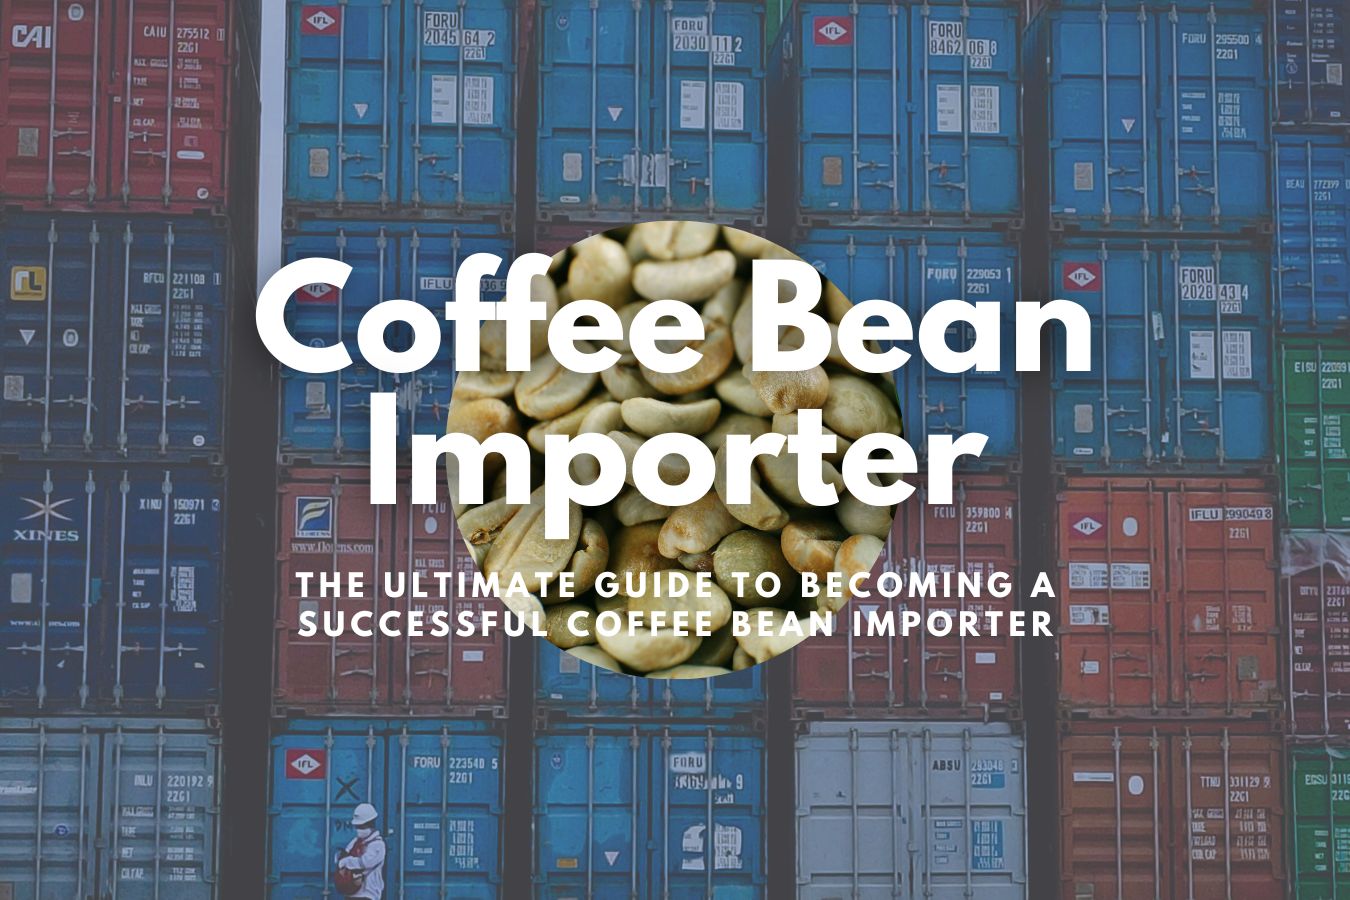 Coffee Bean Importer The Ultimate Guide to Becoming a Successful Coffee Importer